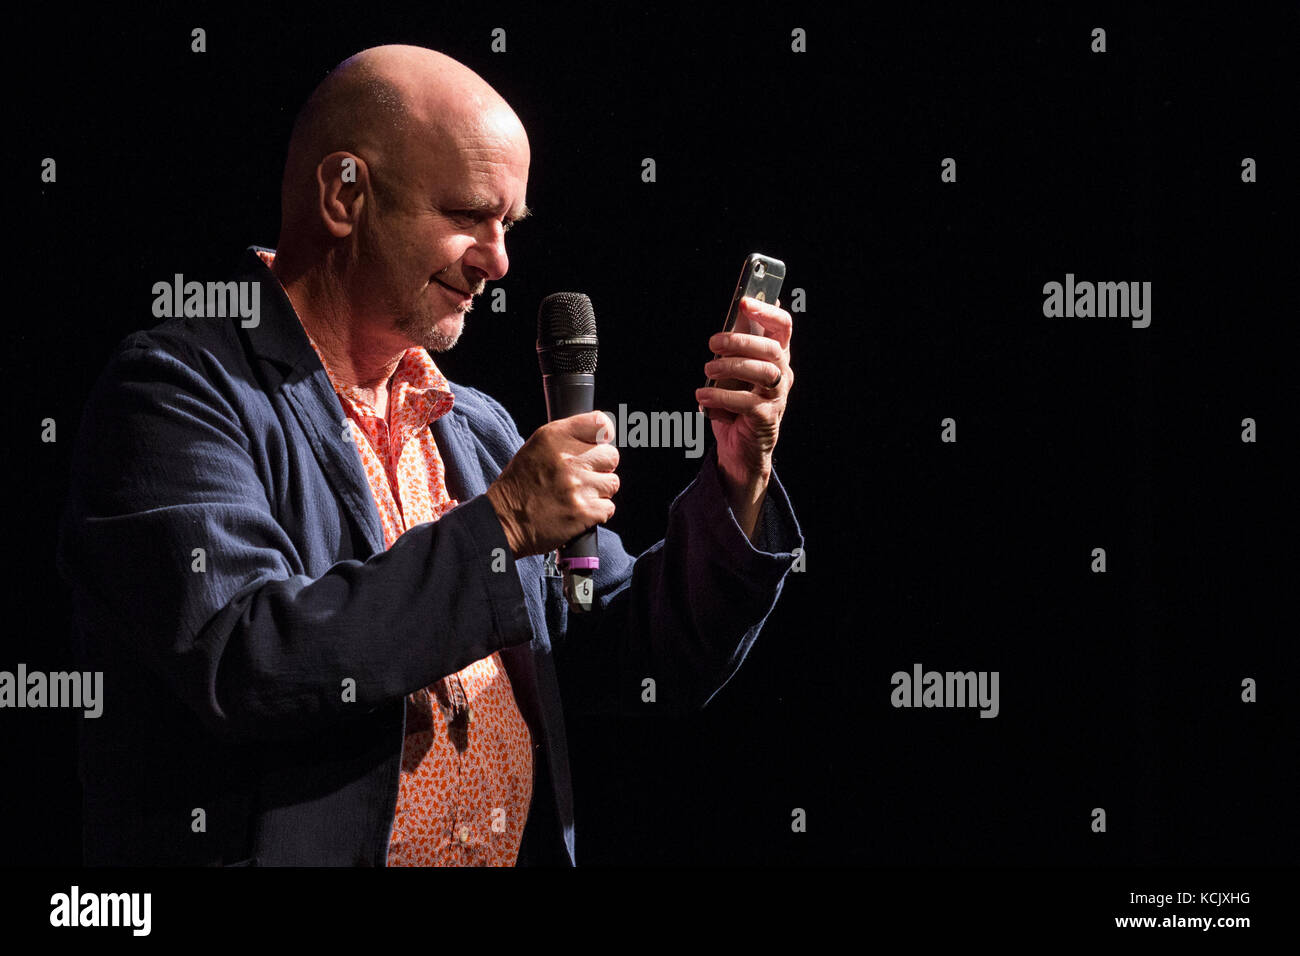 Essen, Germany. 5th Oct, 2017. Pictured: Nick Hornby. The Great Hornby, event with British writer Nick Hornby and presenter Philipp Schwenke. From 4th to 8th October 2017 the international literature festival lit.RUHR presents well known international authors in interviews and readings. Credit: Bettina Strenske/Alamy Live News Stock Photo